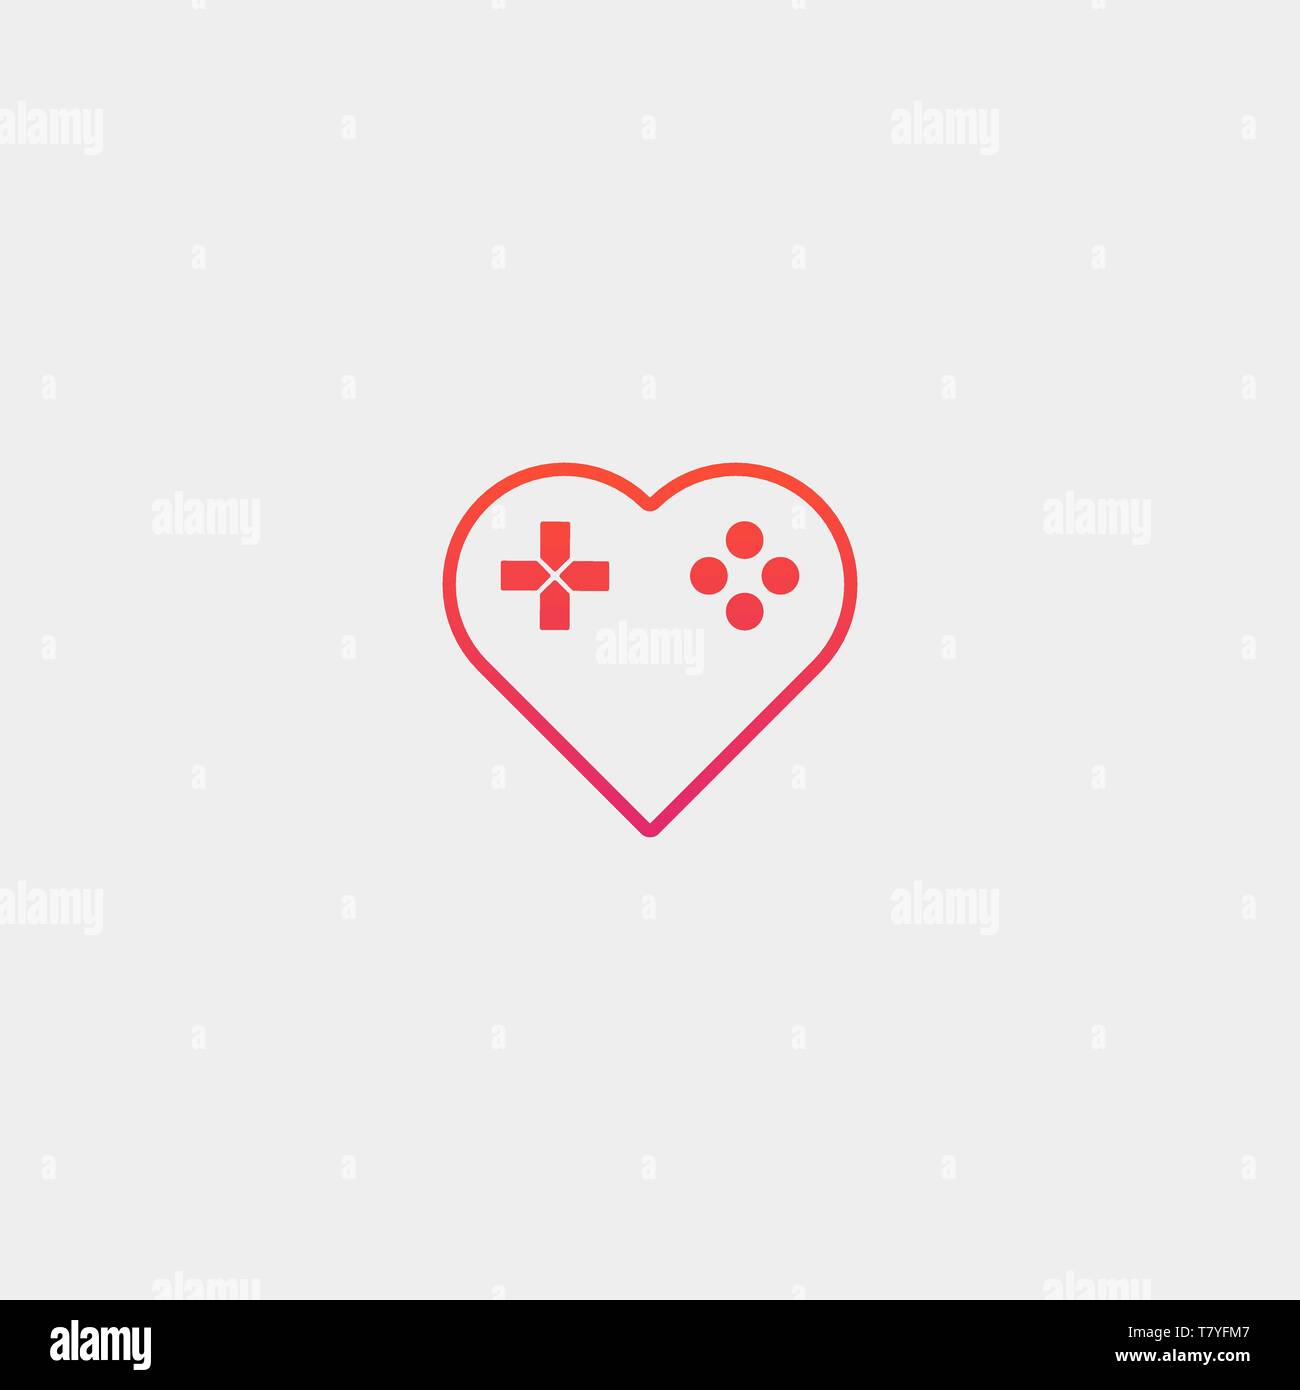 love game pad logo design template vector illustration icon element isolated Stock Vector